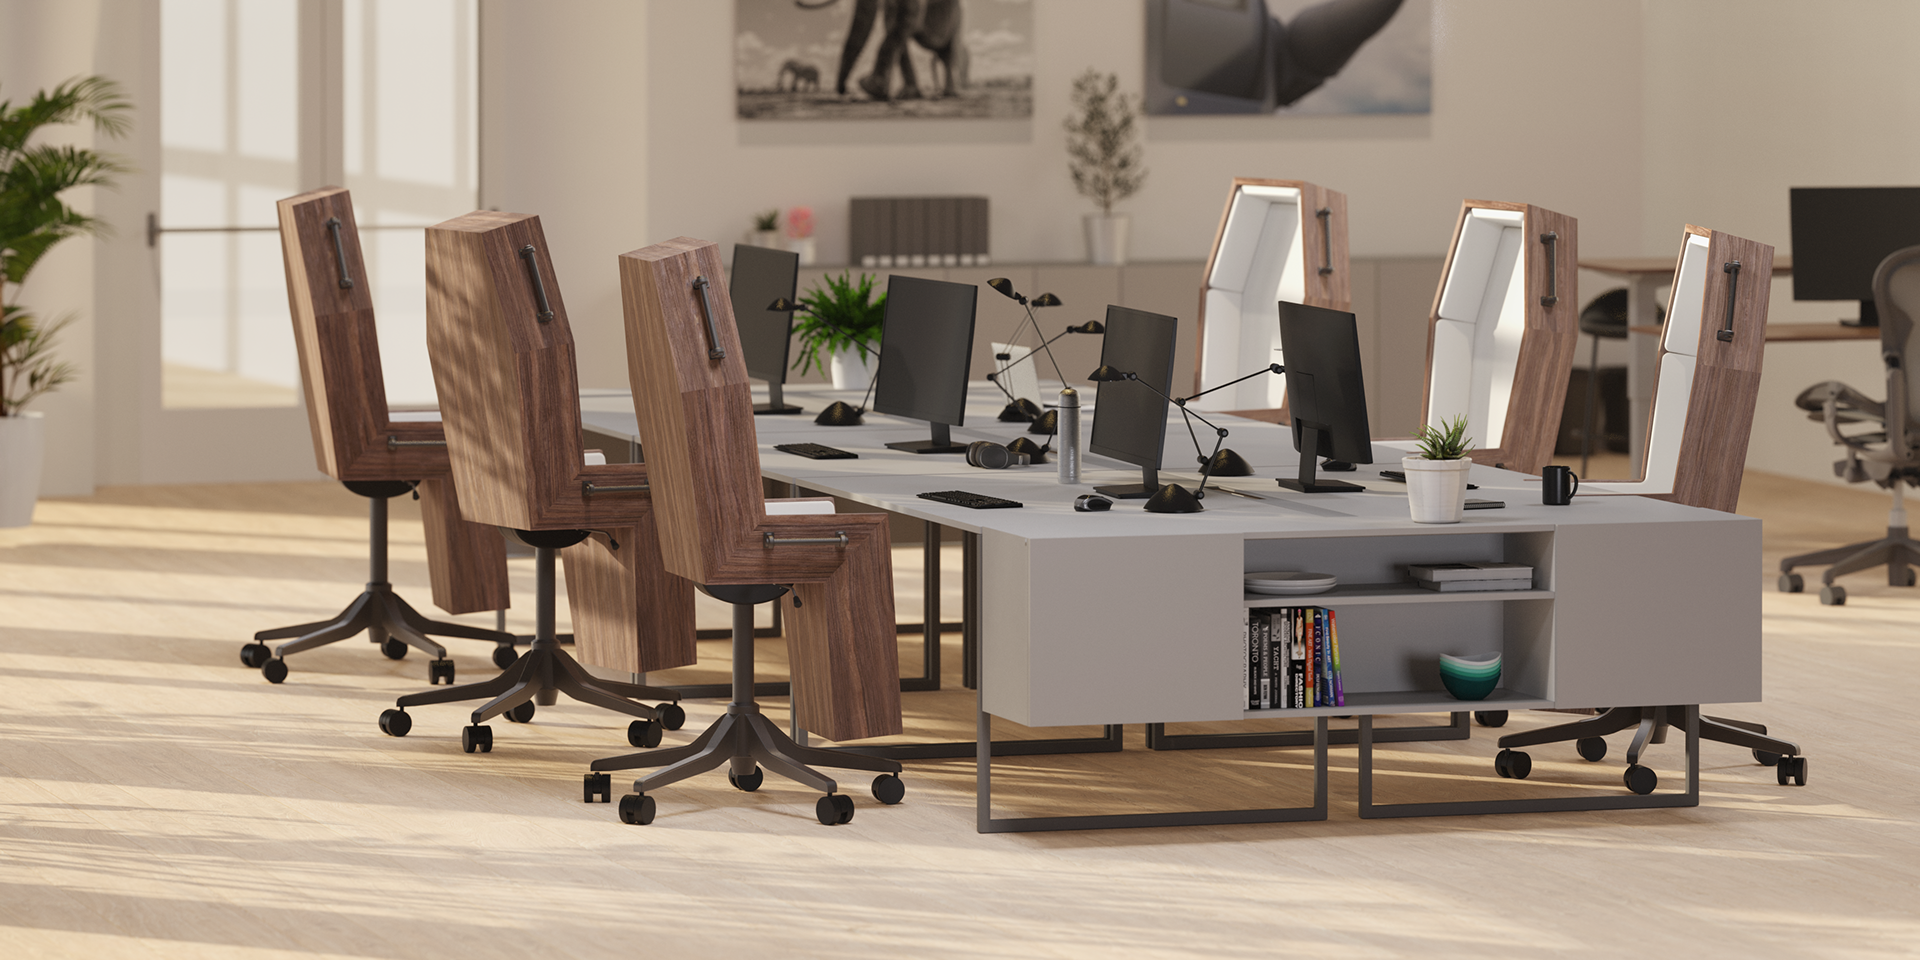 Is Your Office Job Slowly Killing You?- These Coffin Chairs Beware Those Who Work For Hours Sitting!